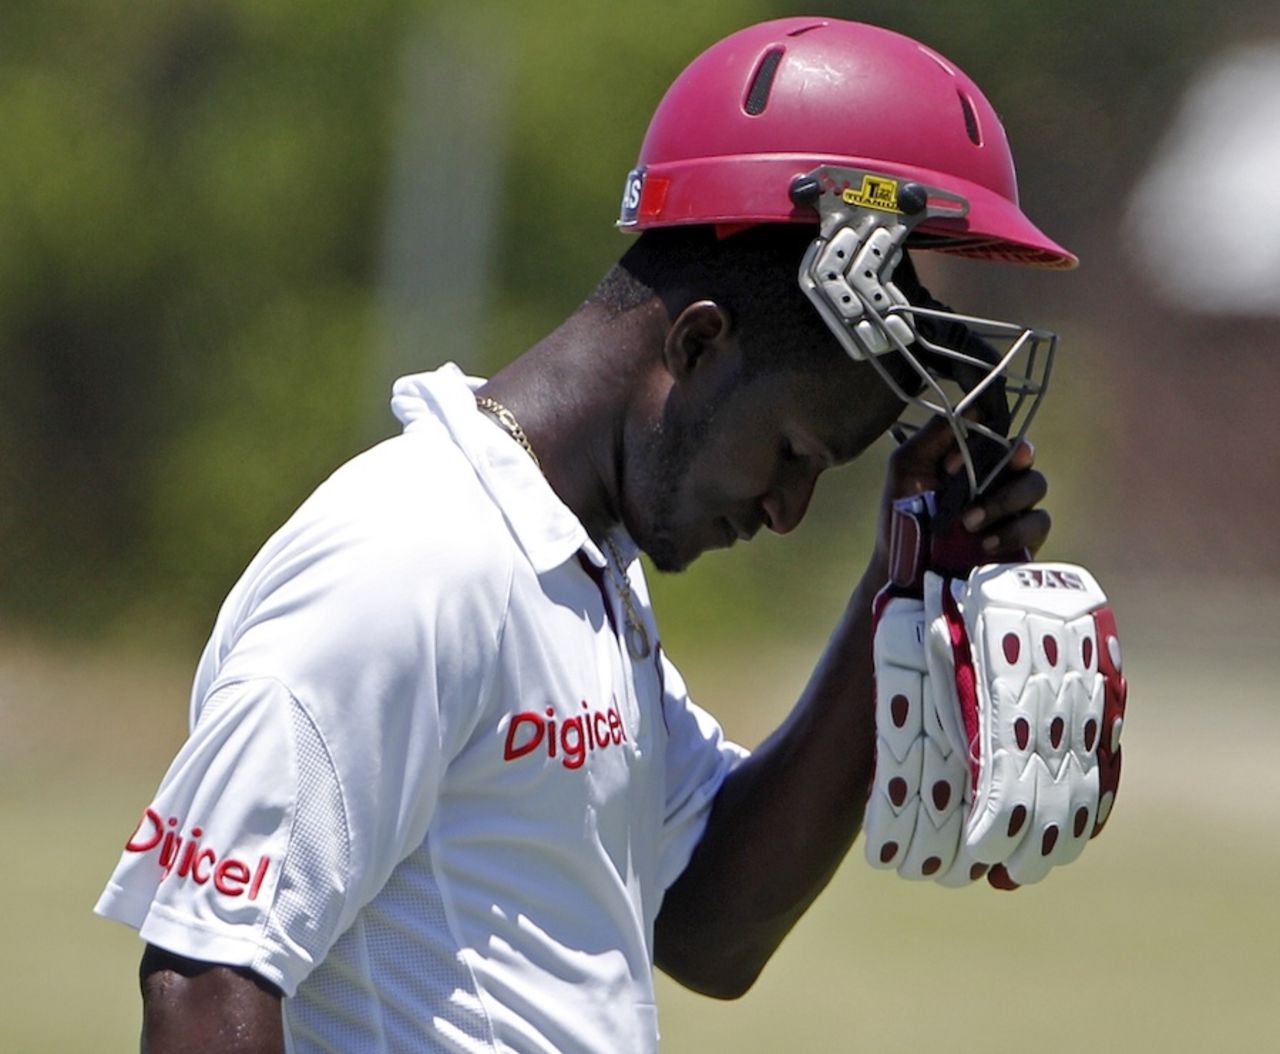 Darren Sammy was dismissed for 41, West Indies v Pakistan, 2nd Test, St Kitts, 5th day, May 24, 2011